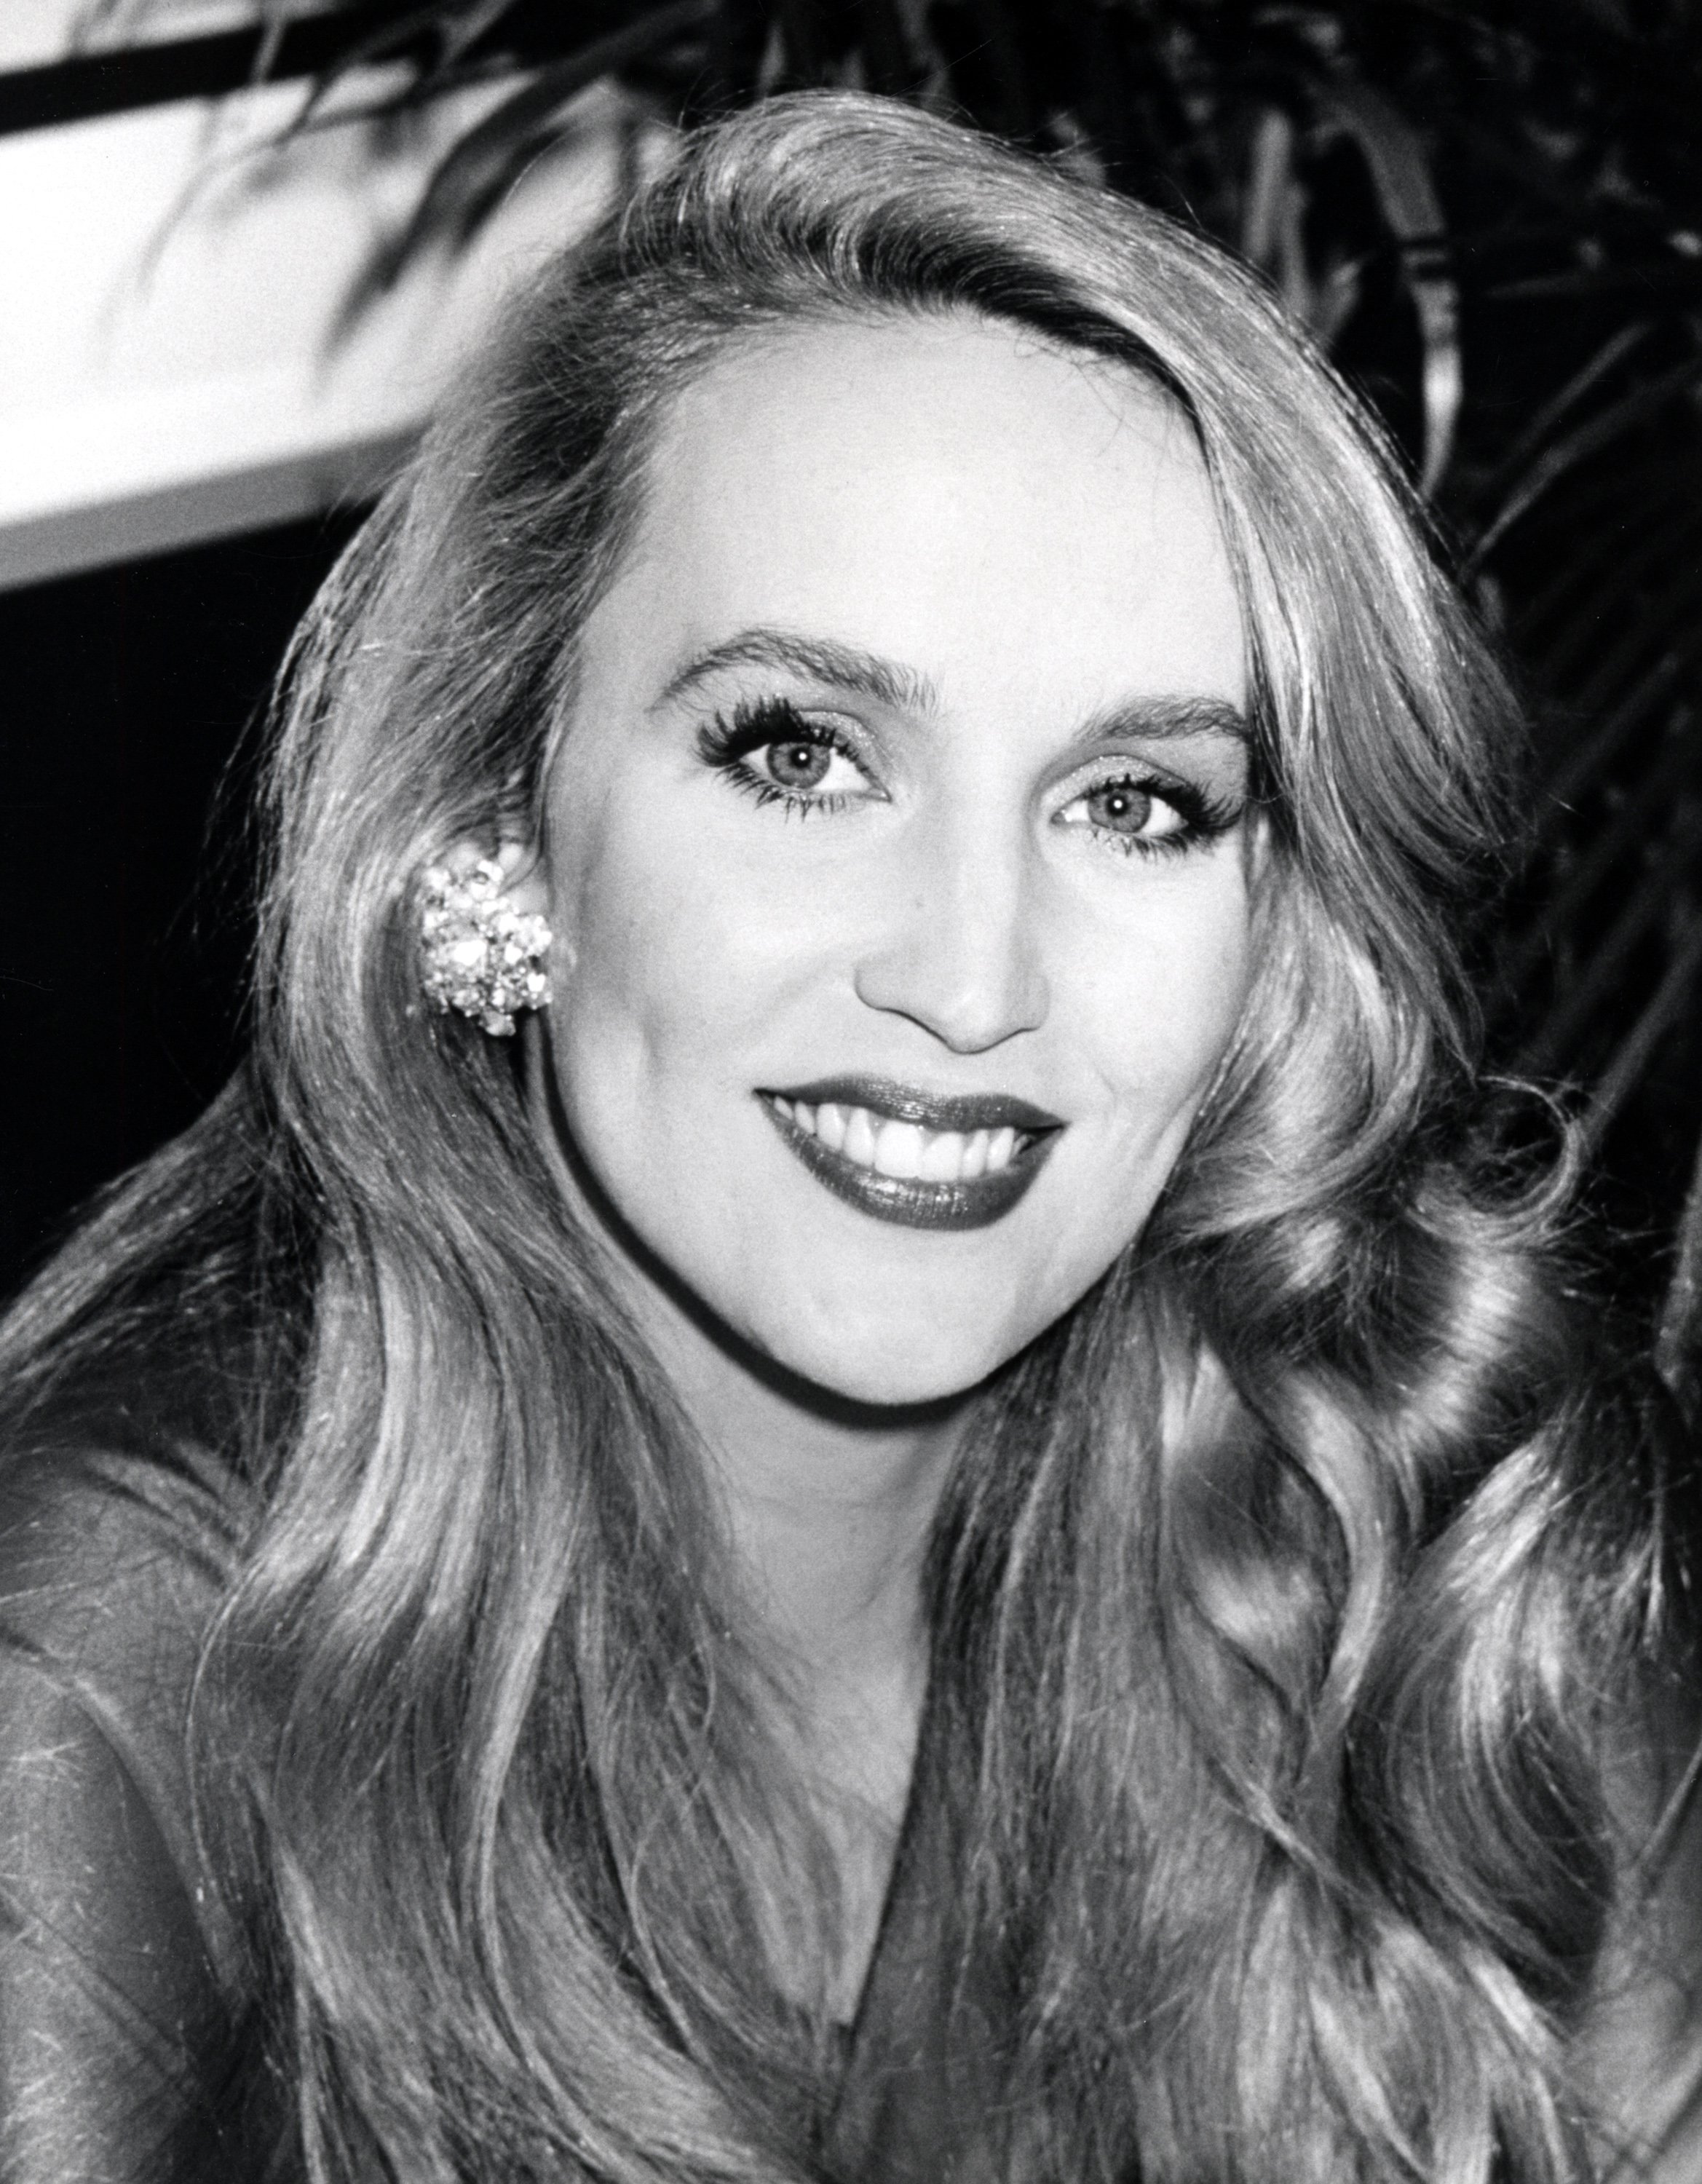 Jerry Hall attends the "A view to kill" Screening Party at the Tuileries on May 15, 1985 in New York.  |  Source: Getty Images